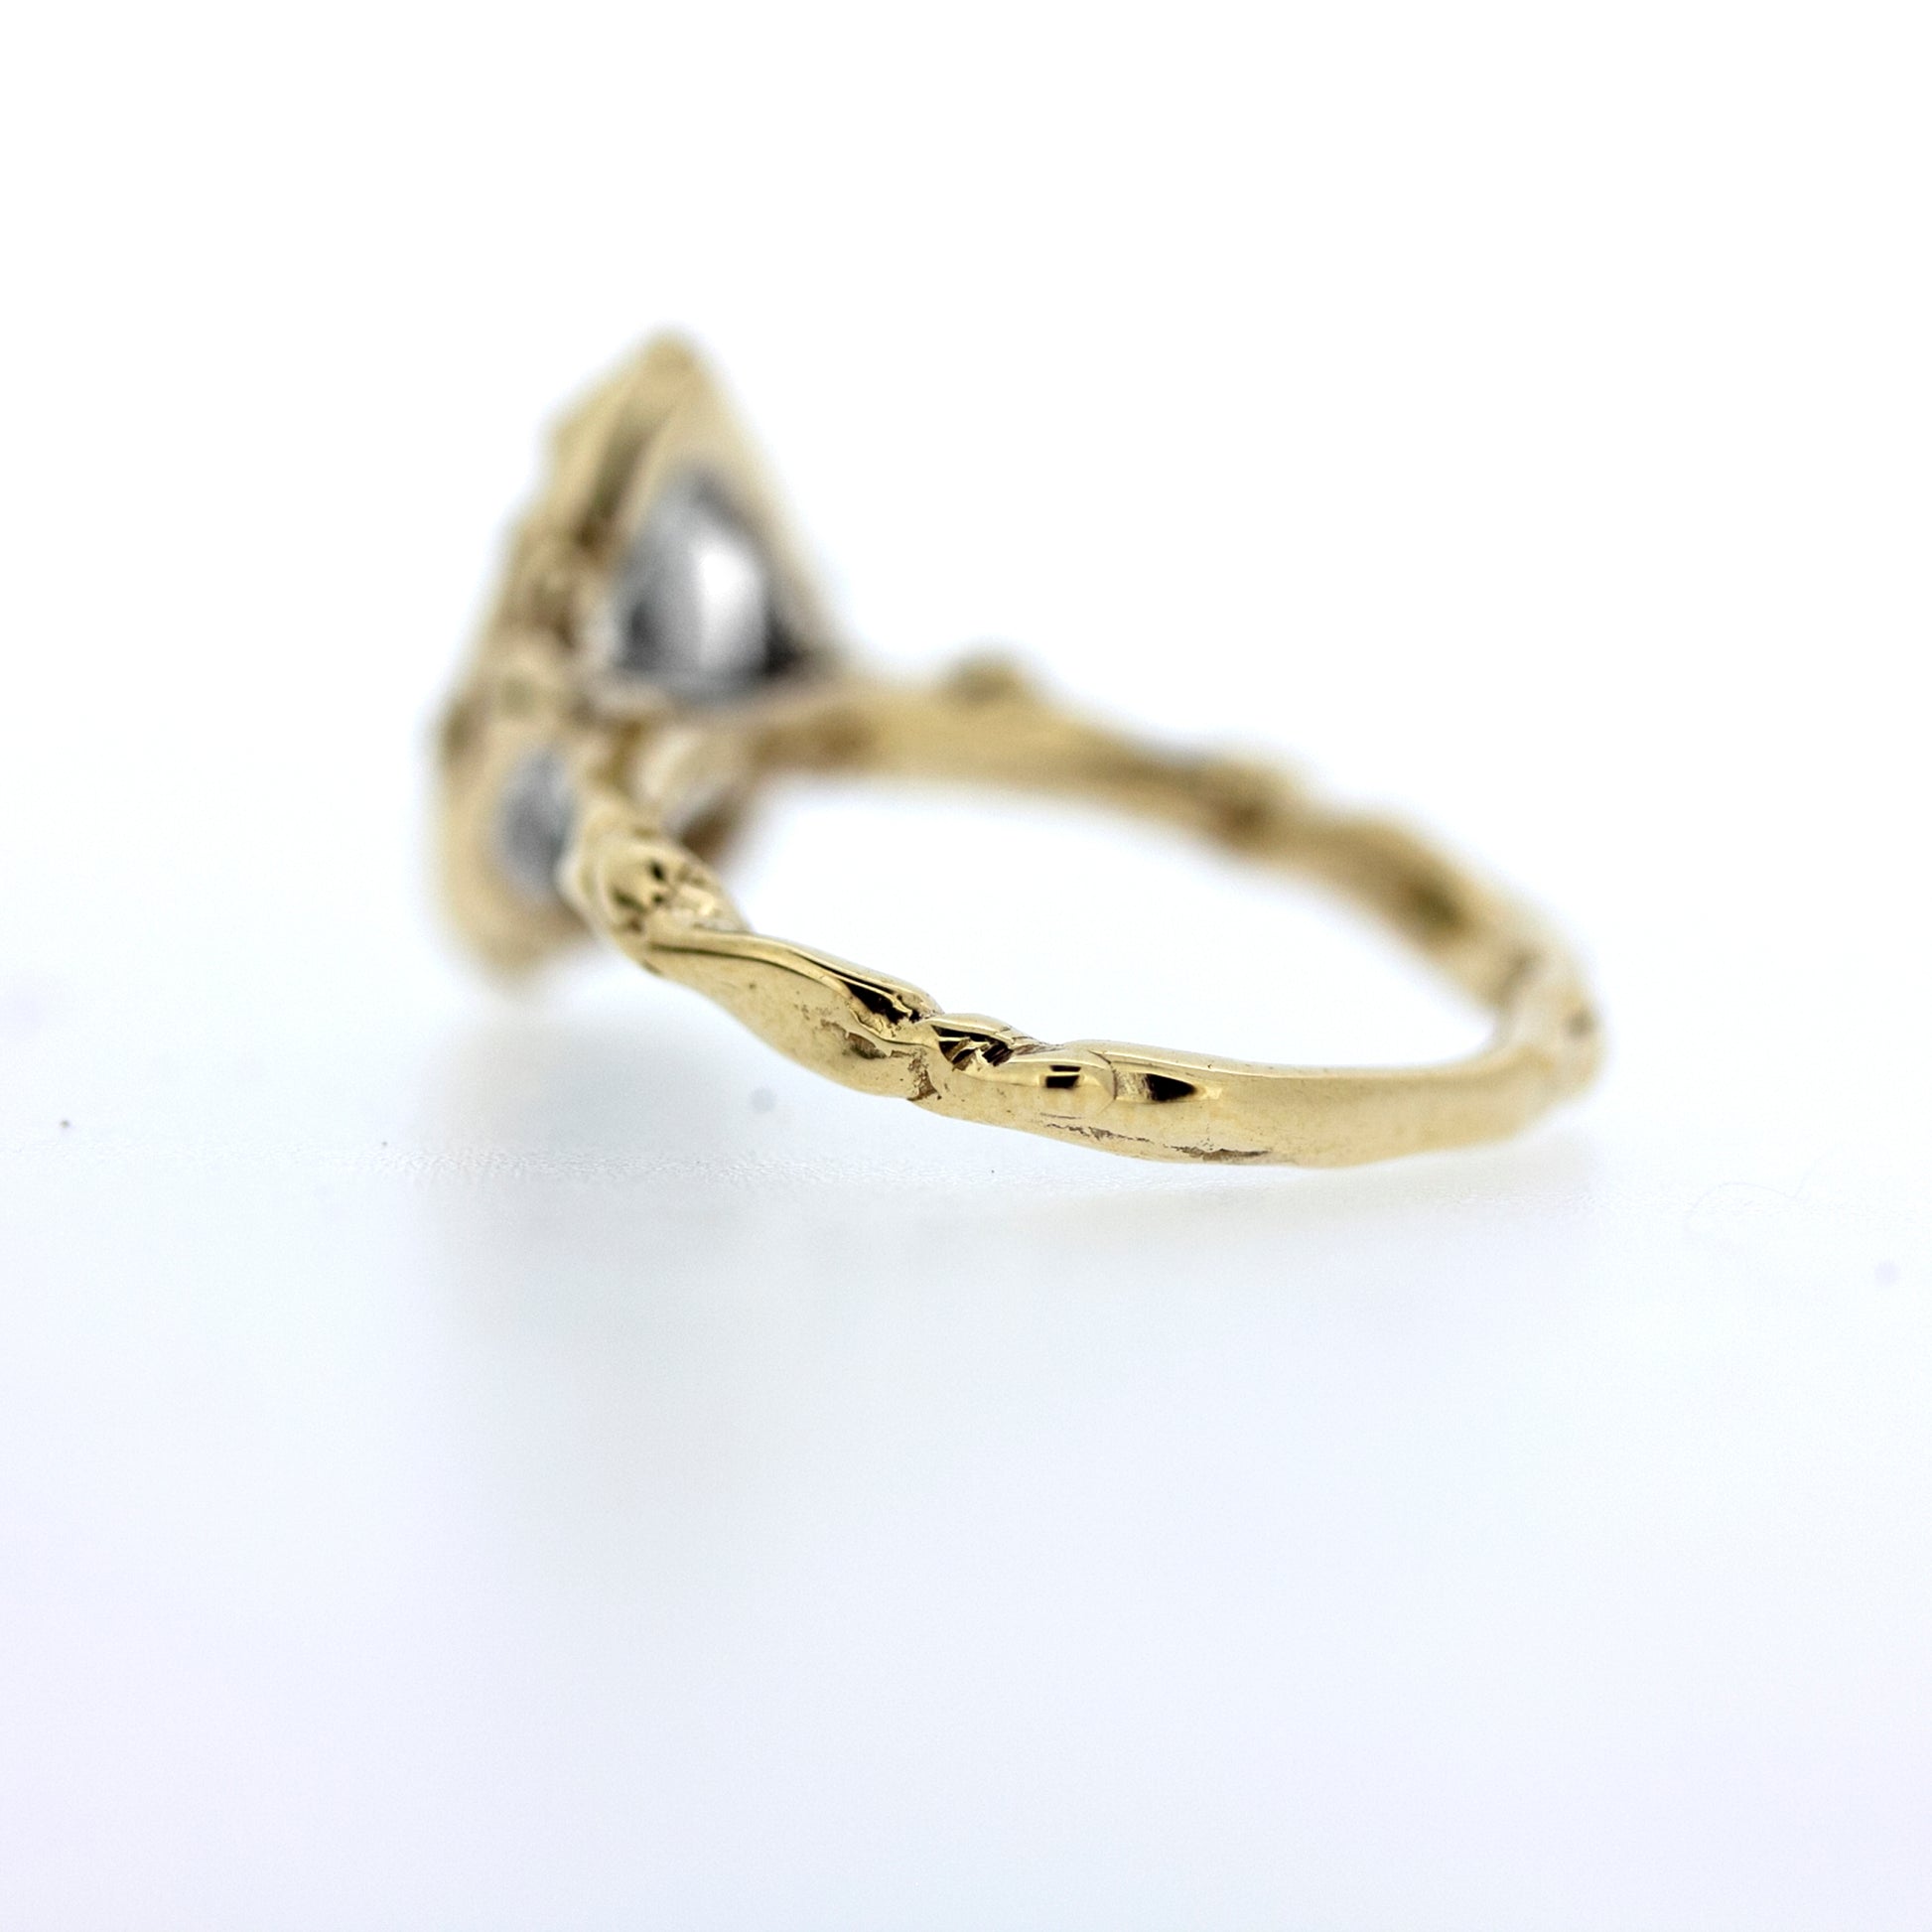 unique handmade engagement ring with hand wrought organic nature inspired twisted water texture details